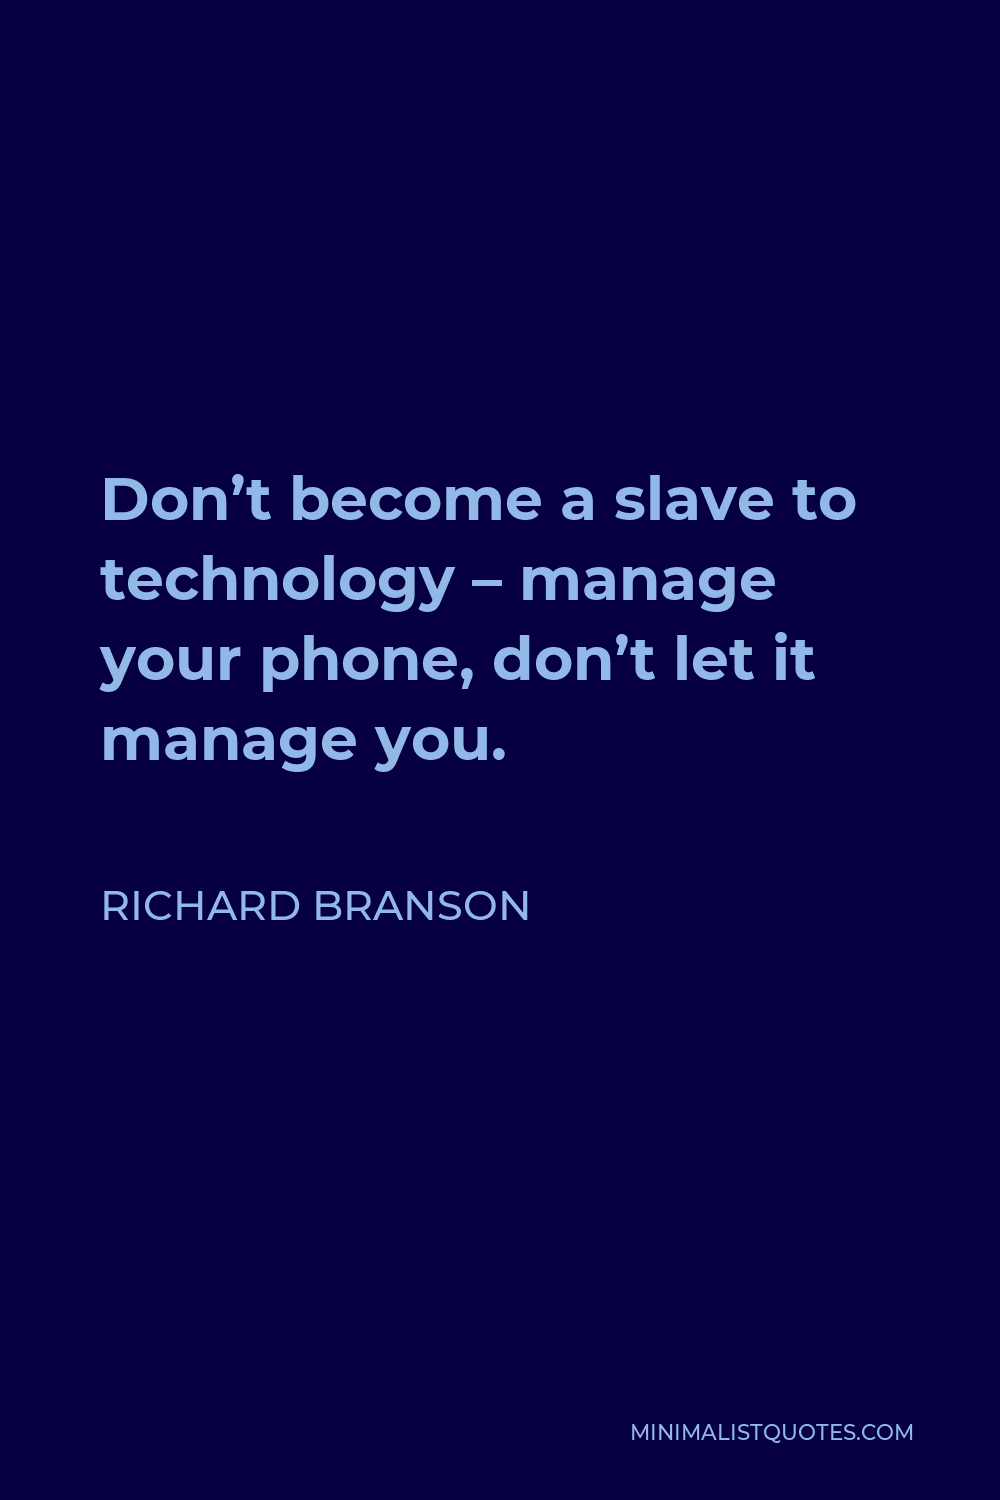 Richard Branson Quote - Don’t become a slave to technology – manage your phone, don’t let it manage you.